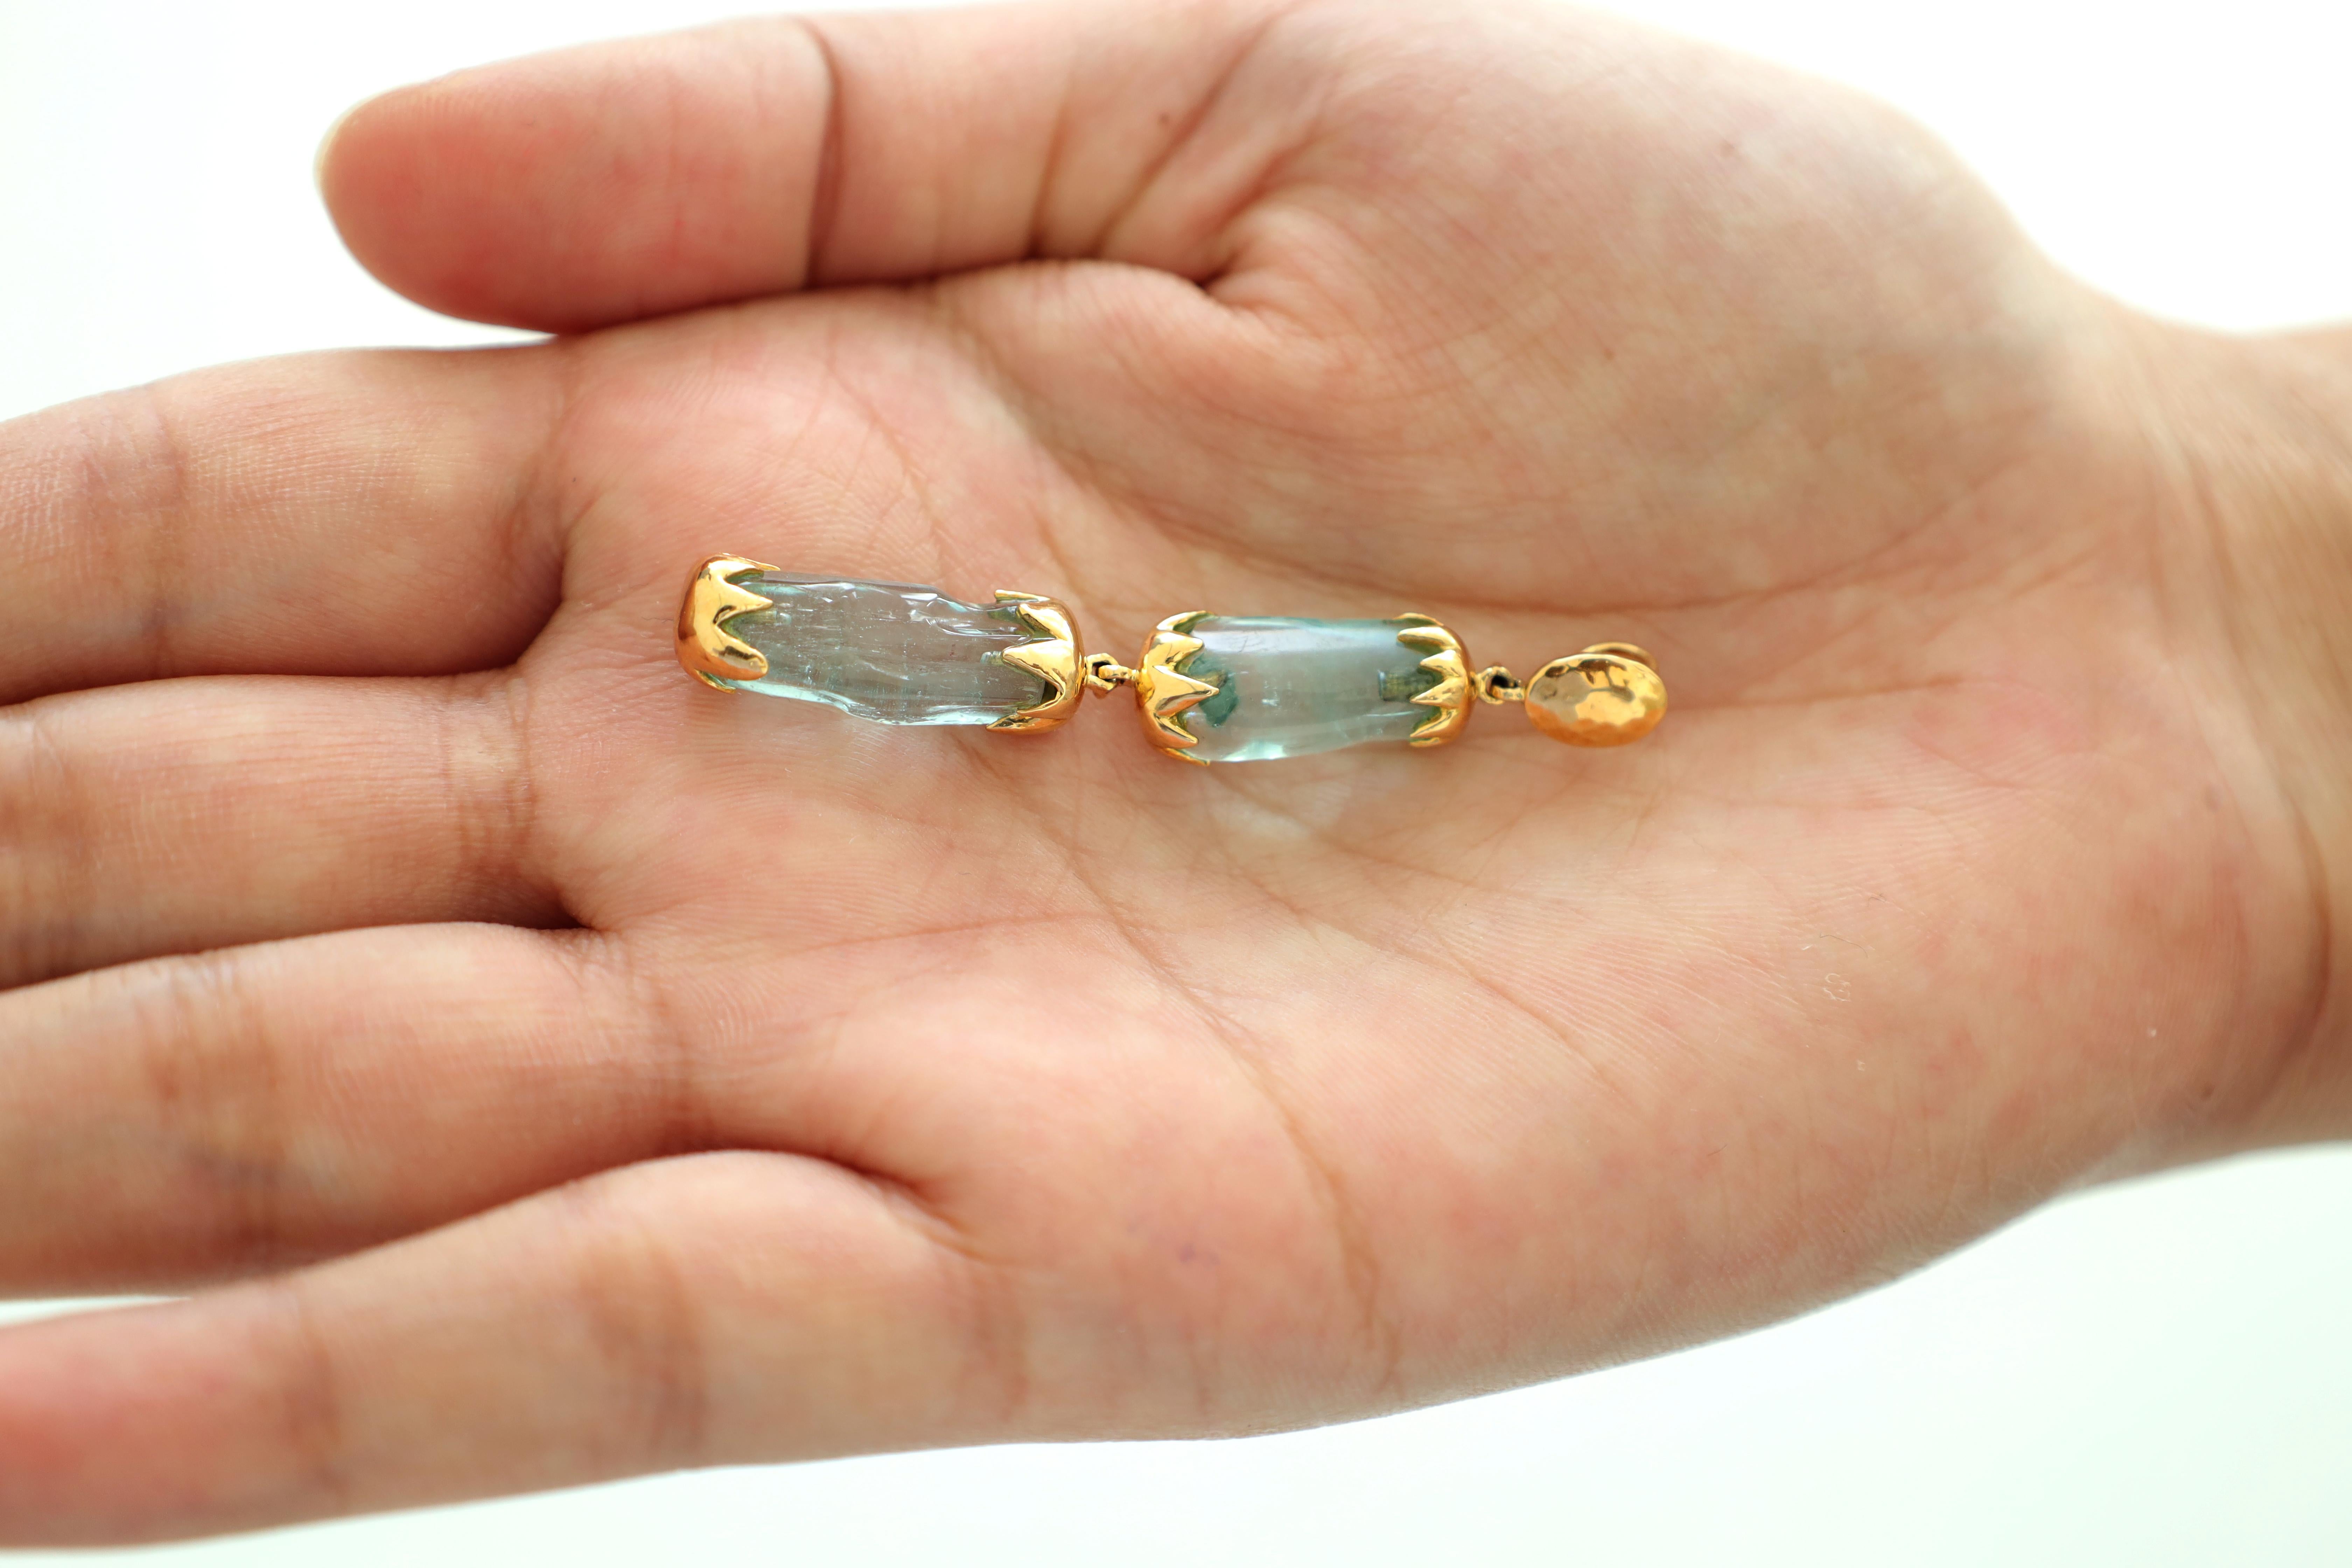 Clear Aquamarine Tumbled Pendant in 18k Gold In New Condition For Sale In Jaipur, Rajasthan